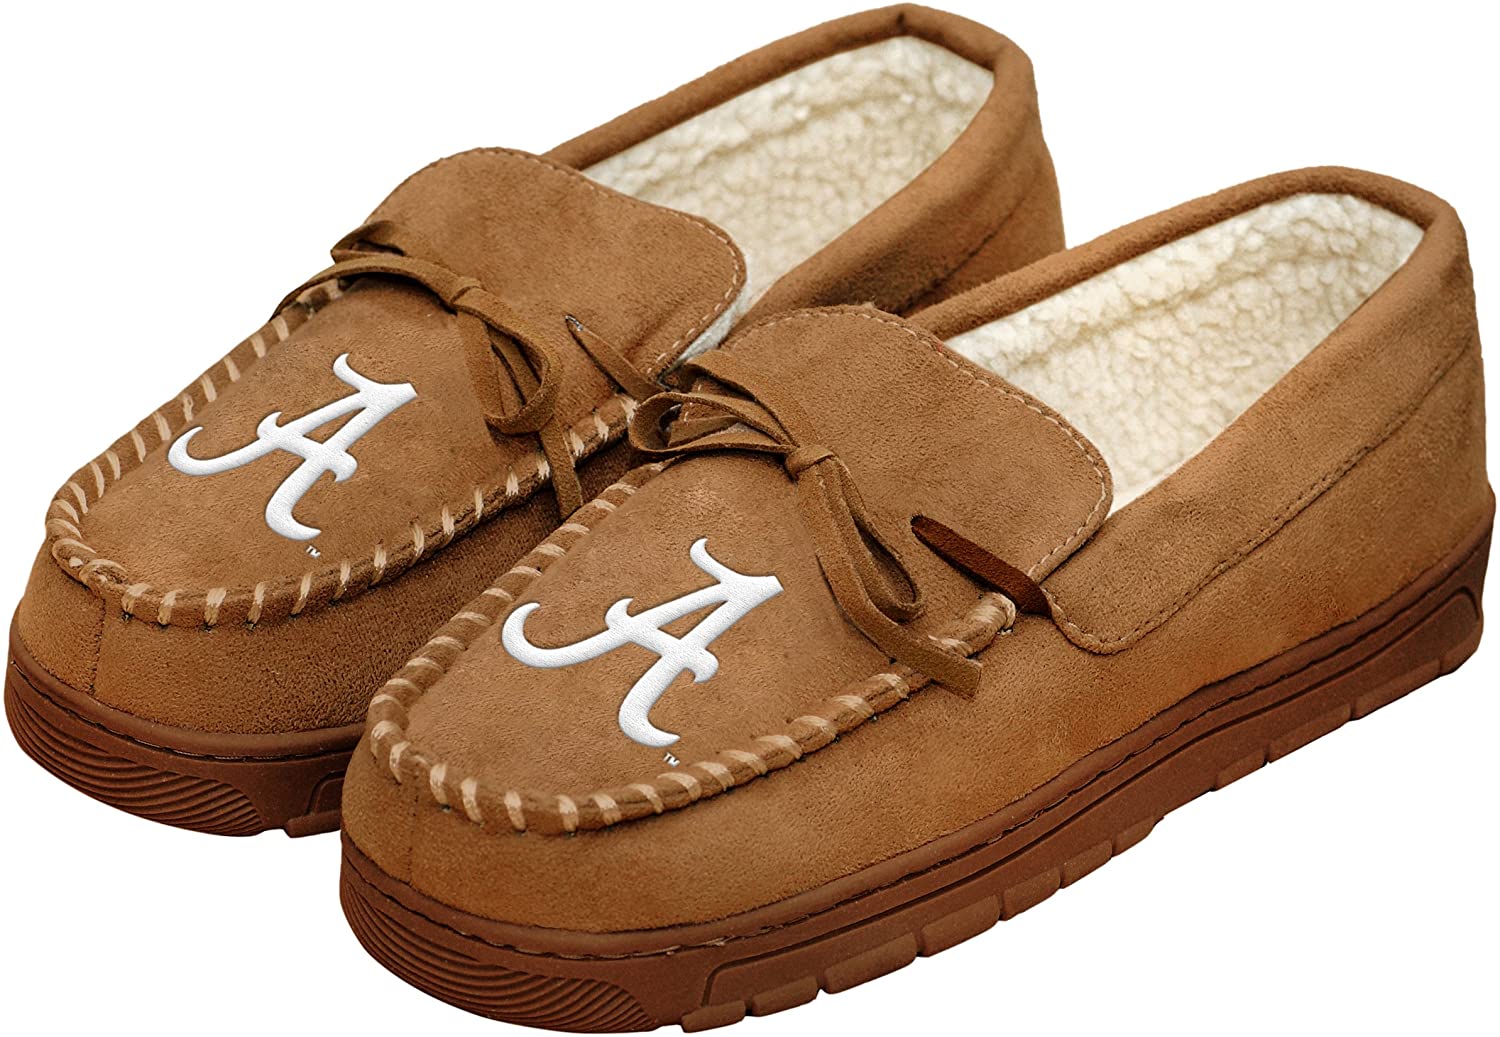 FOCO Mens NCAA College Team Logo Moccasin Slippers